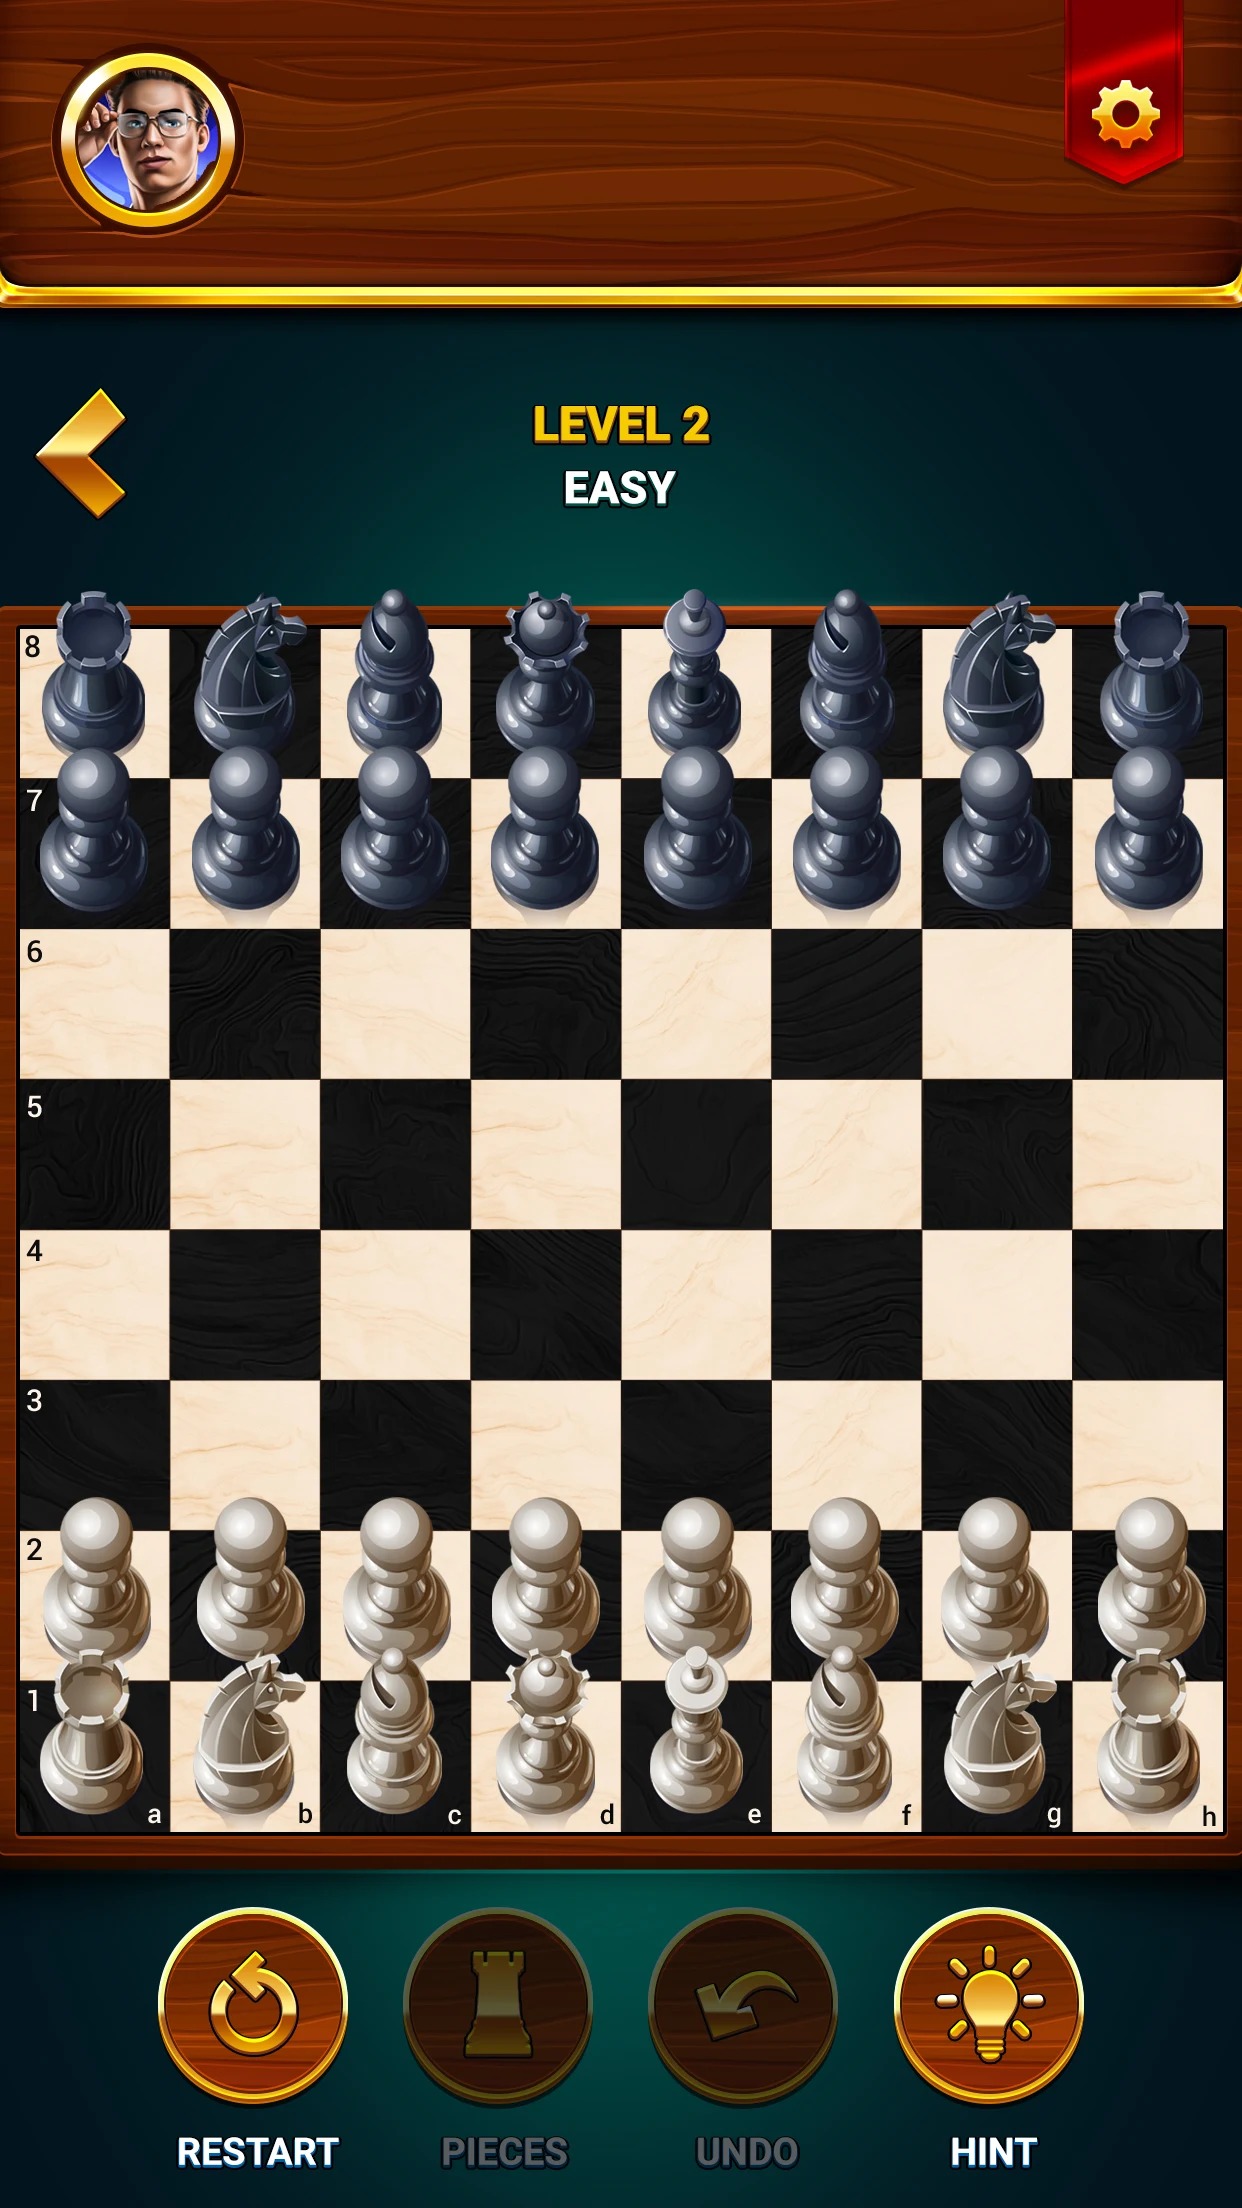 12 Best Chess Apps & Games for Android and iOS - REGENDUS